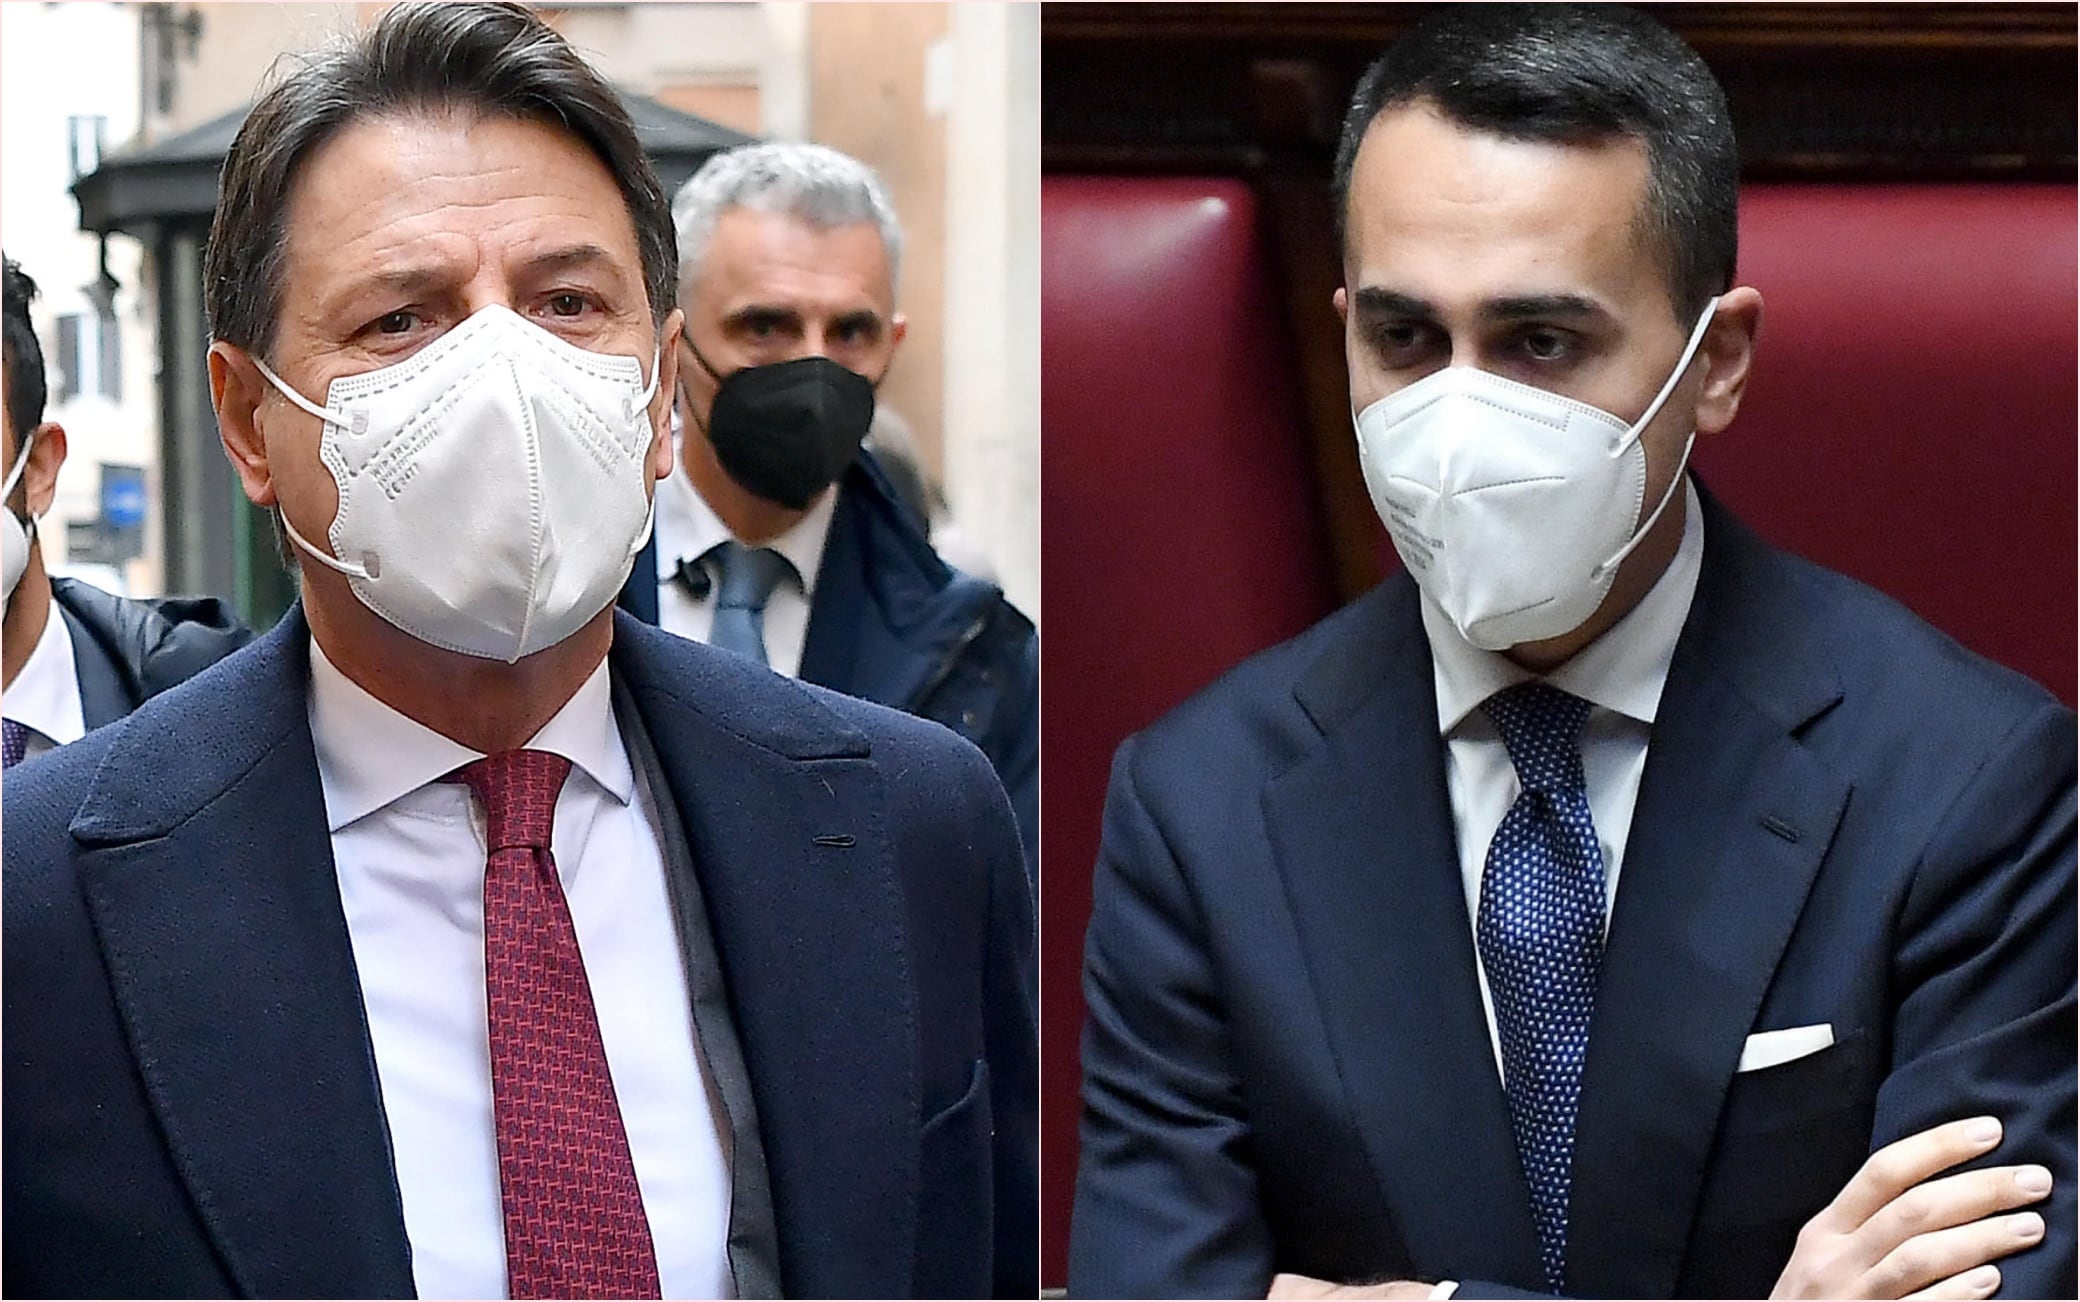 Conte: “Di Maio don’t try to wear me out, he’s damaging the M5S”